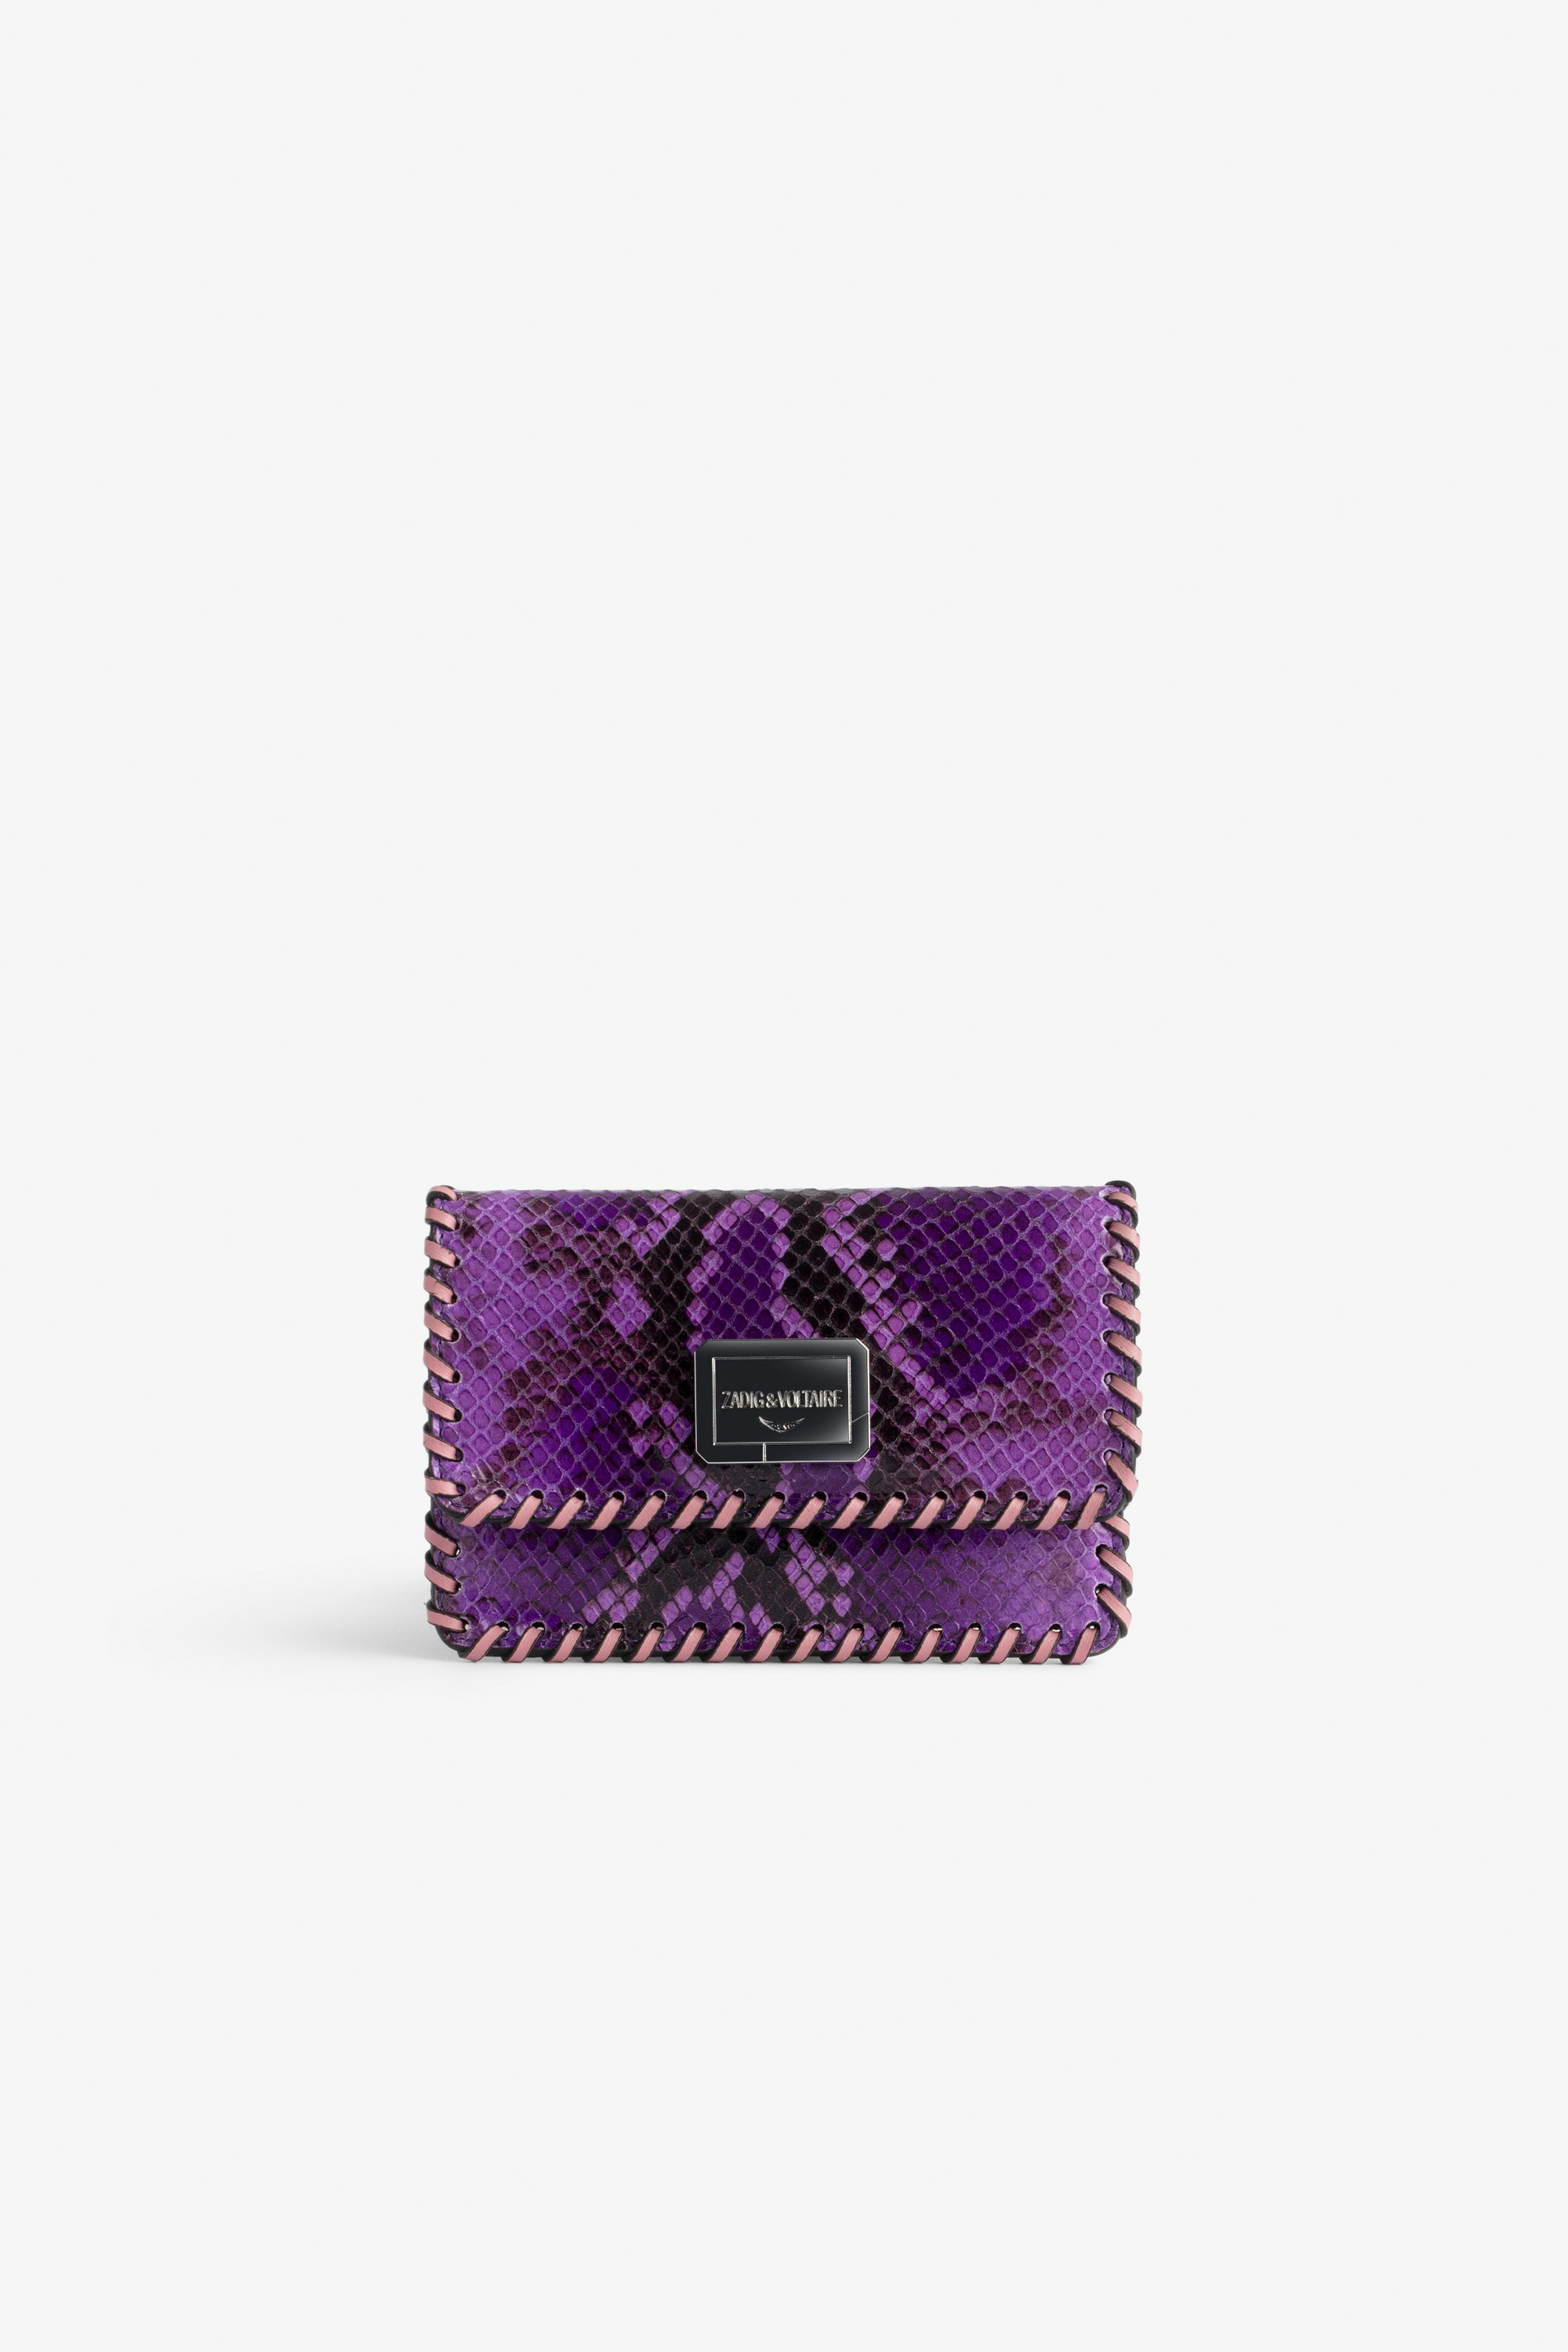 Le Cecilia Wallet Women’s wallet in purple python-effect leather, with a ZV metal clasp and braided edges